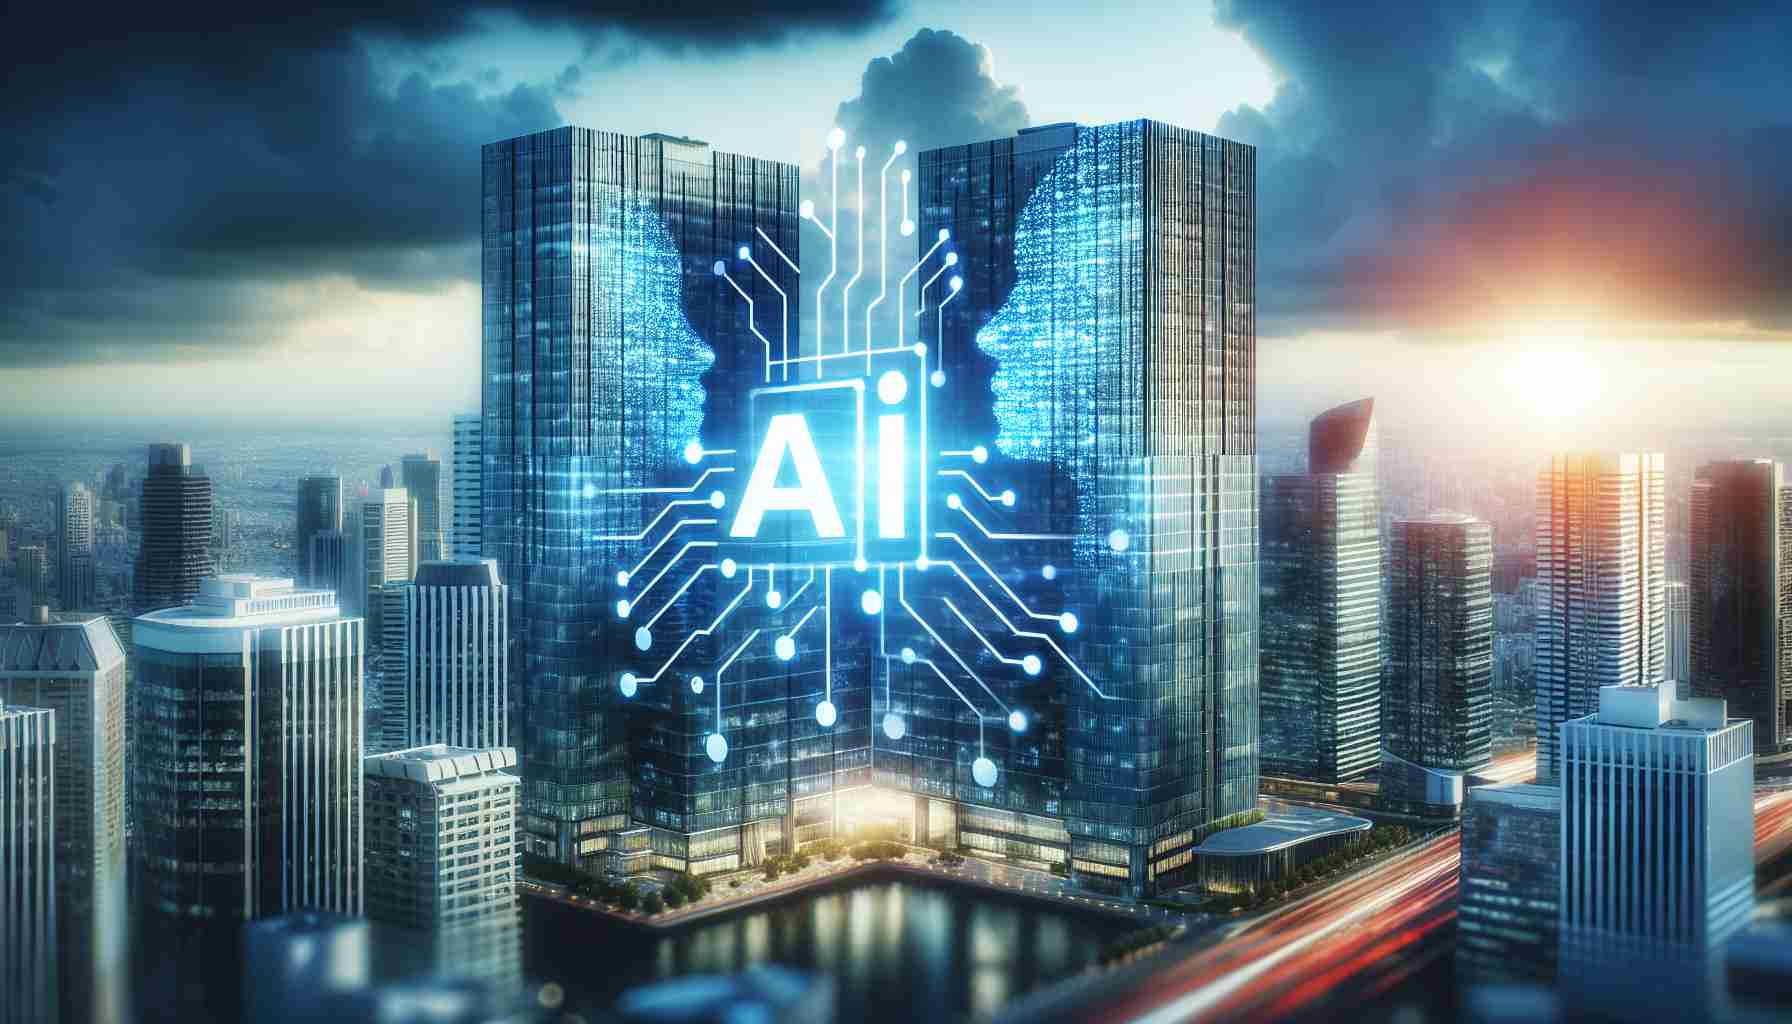 Apple Makes Strategic Move, Expands AI Division with Acquisition of DarwinAI